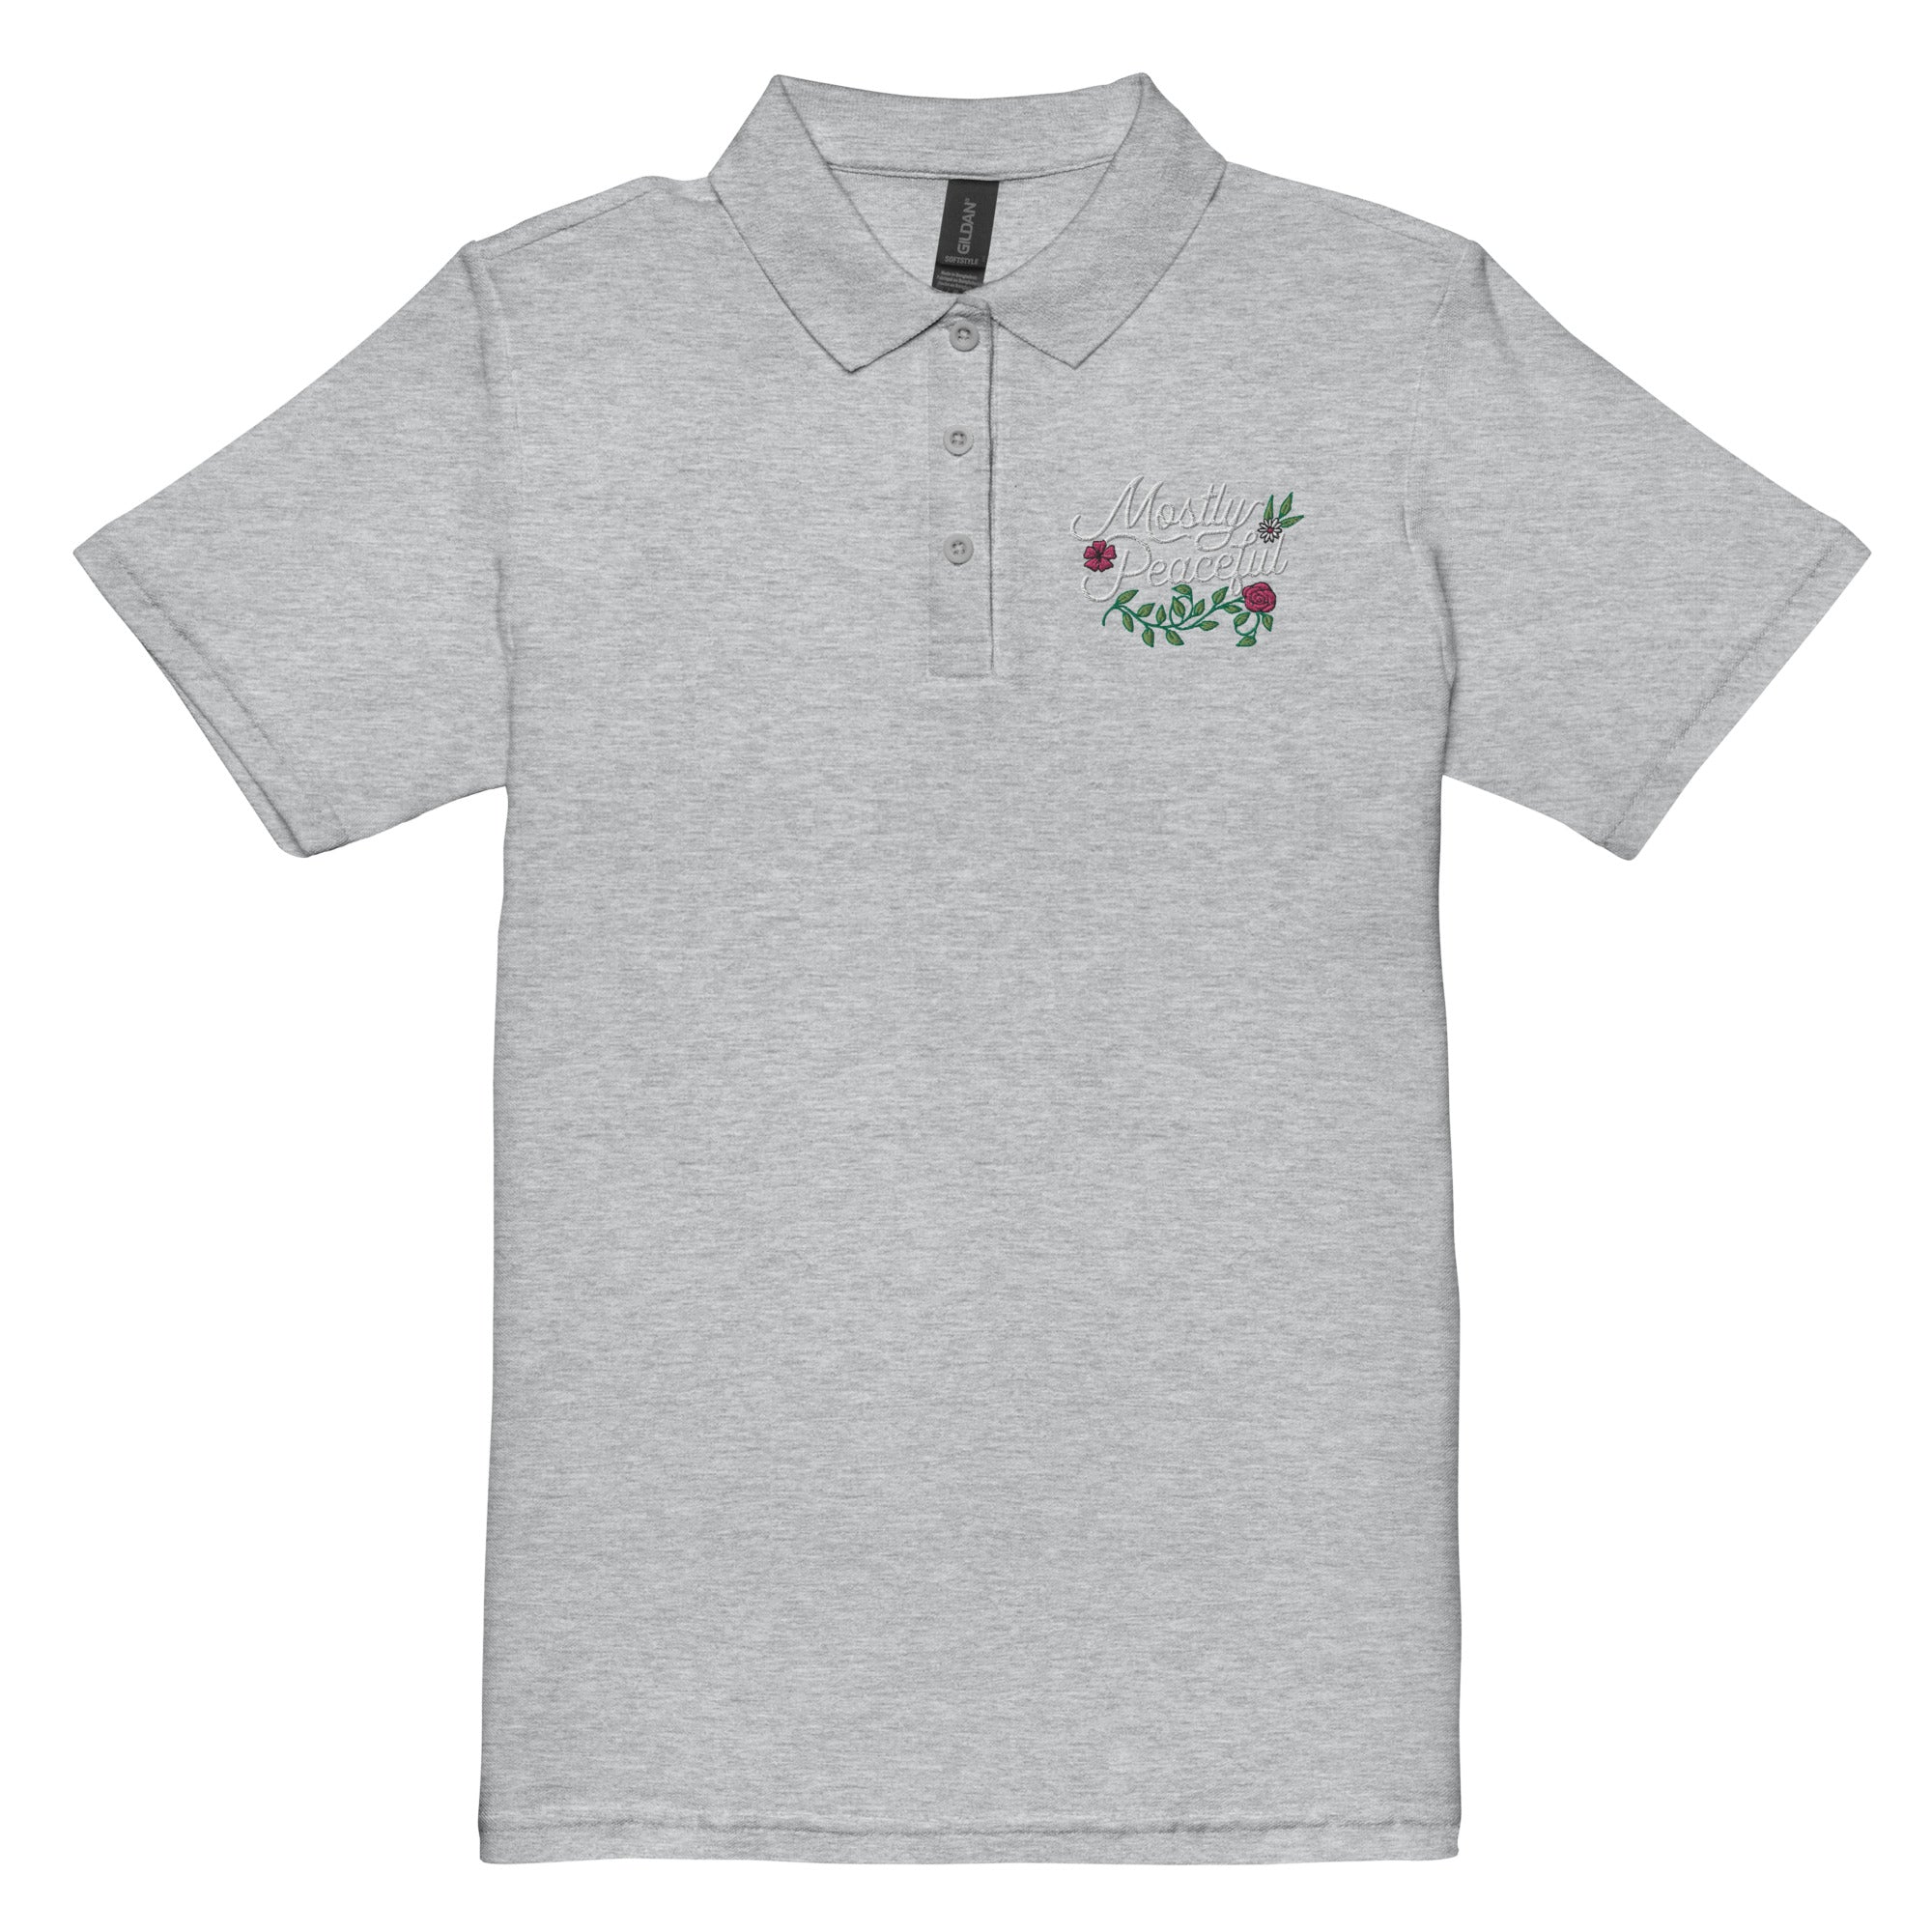 Mostly Peaceful Women’s Pique Polo Shirt